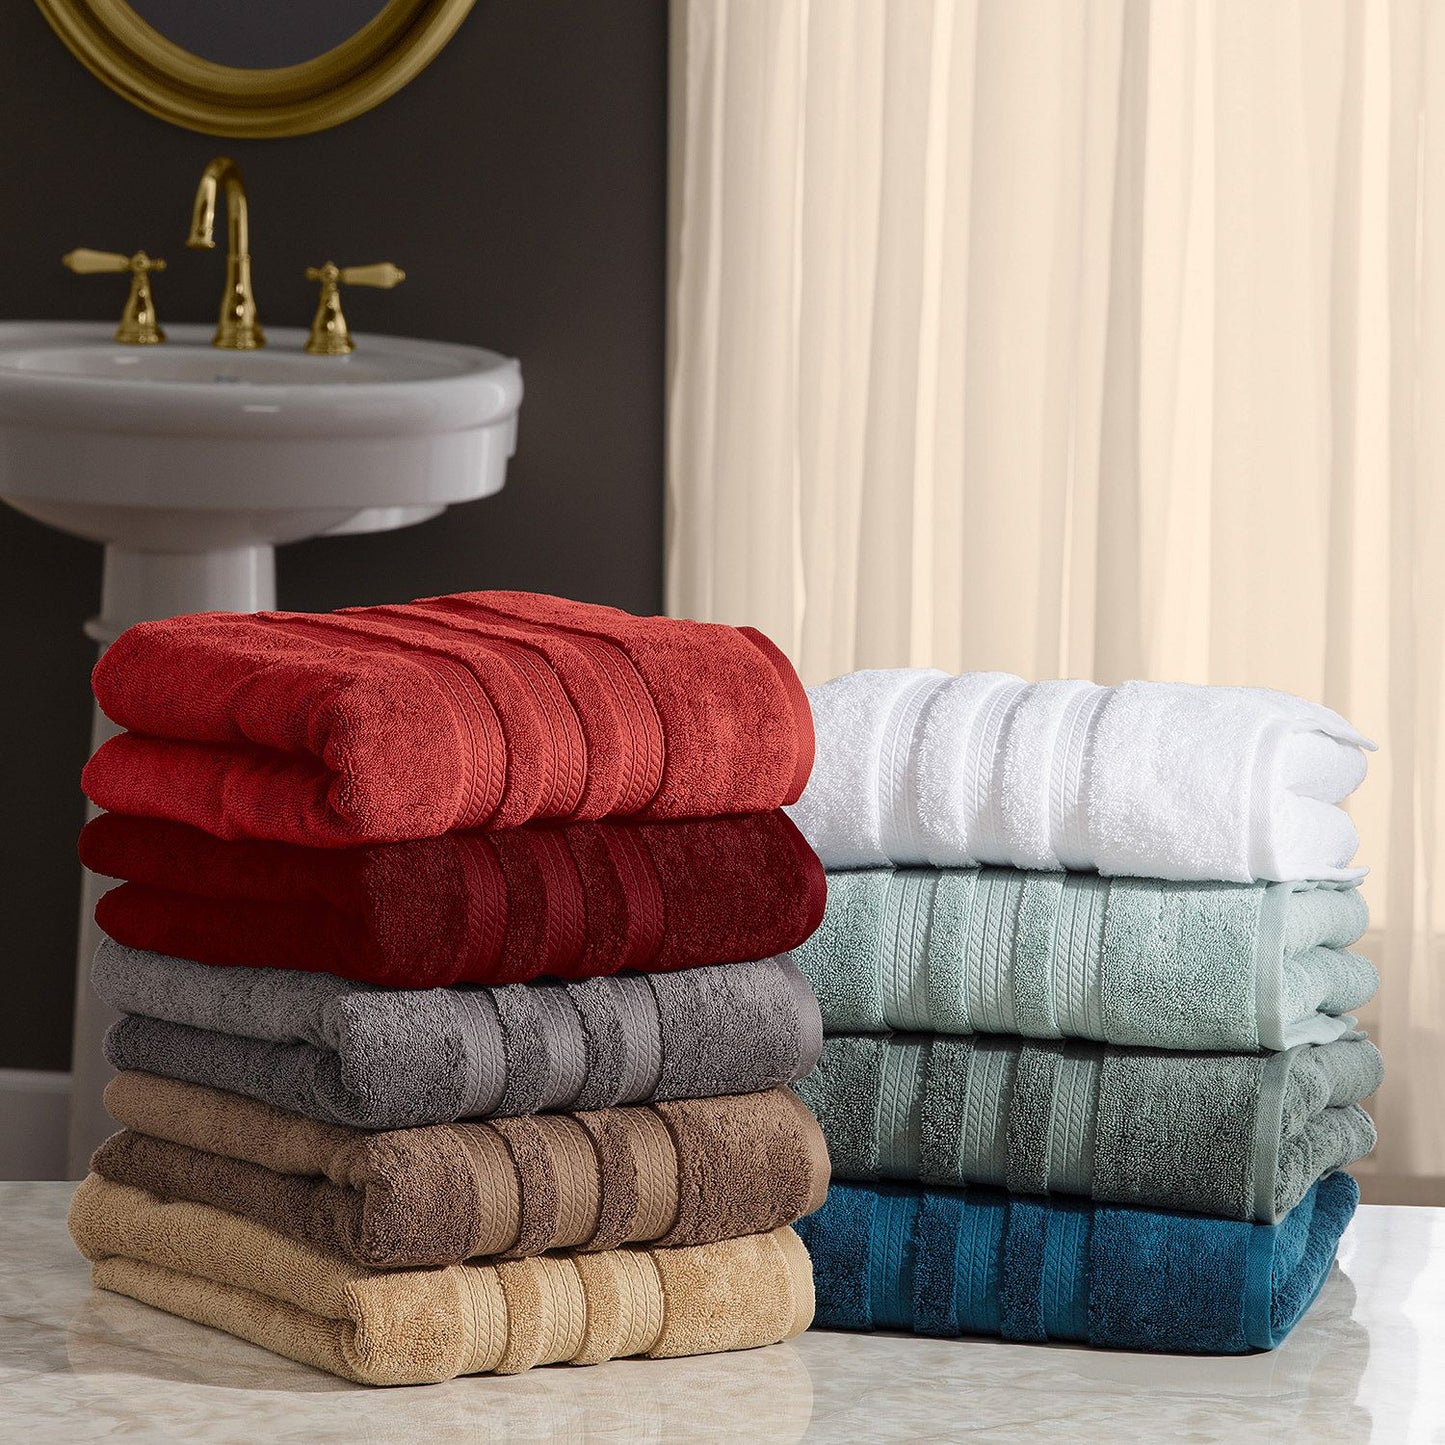  Thick Luxury Bath Towels - 30” x 60”, Heavy Weight, LargeBath  Towels, 100% Combed Cotton, Ultra Soft & Highly Absorbent, 800 GSM